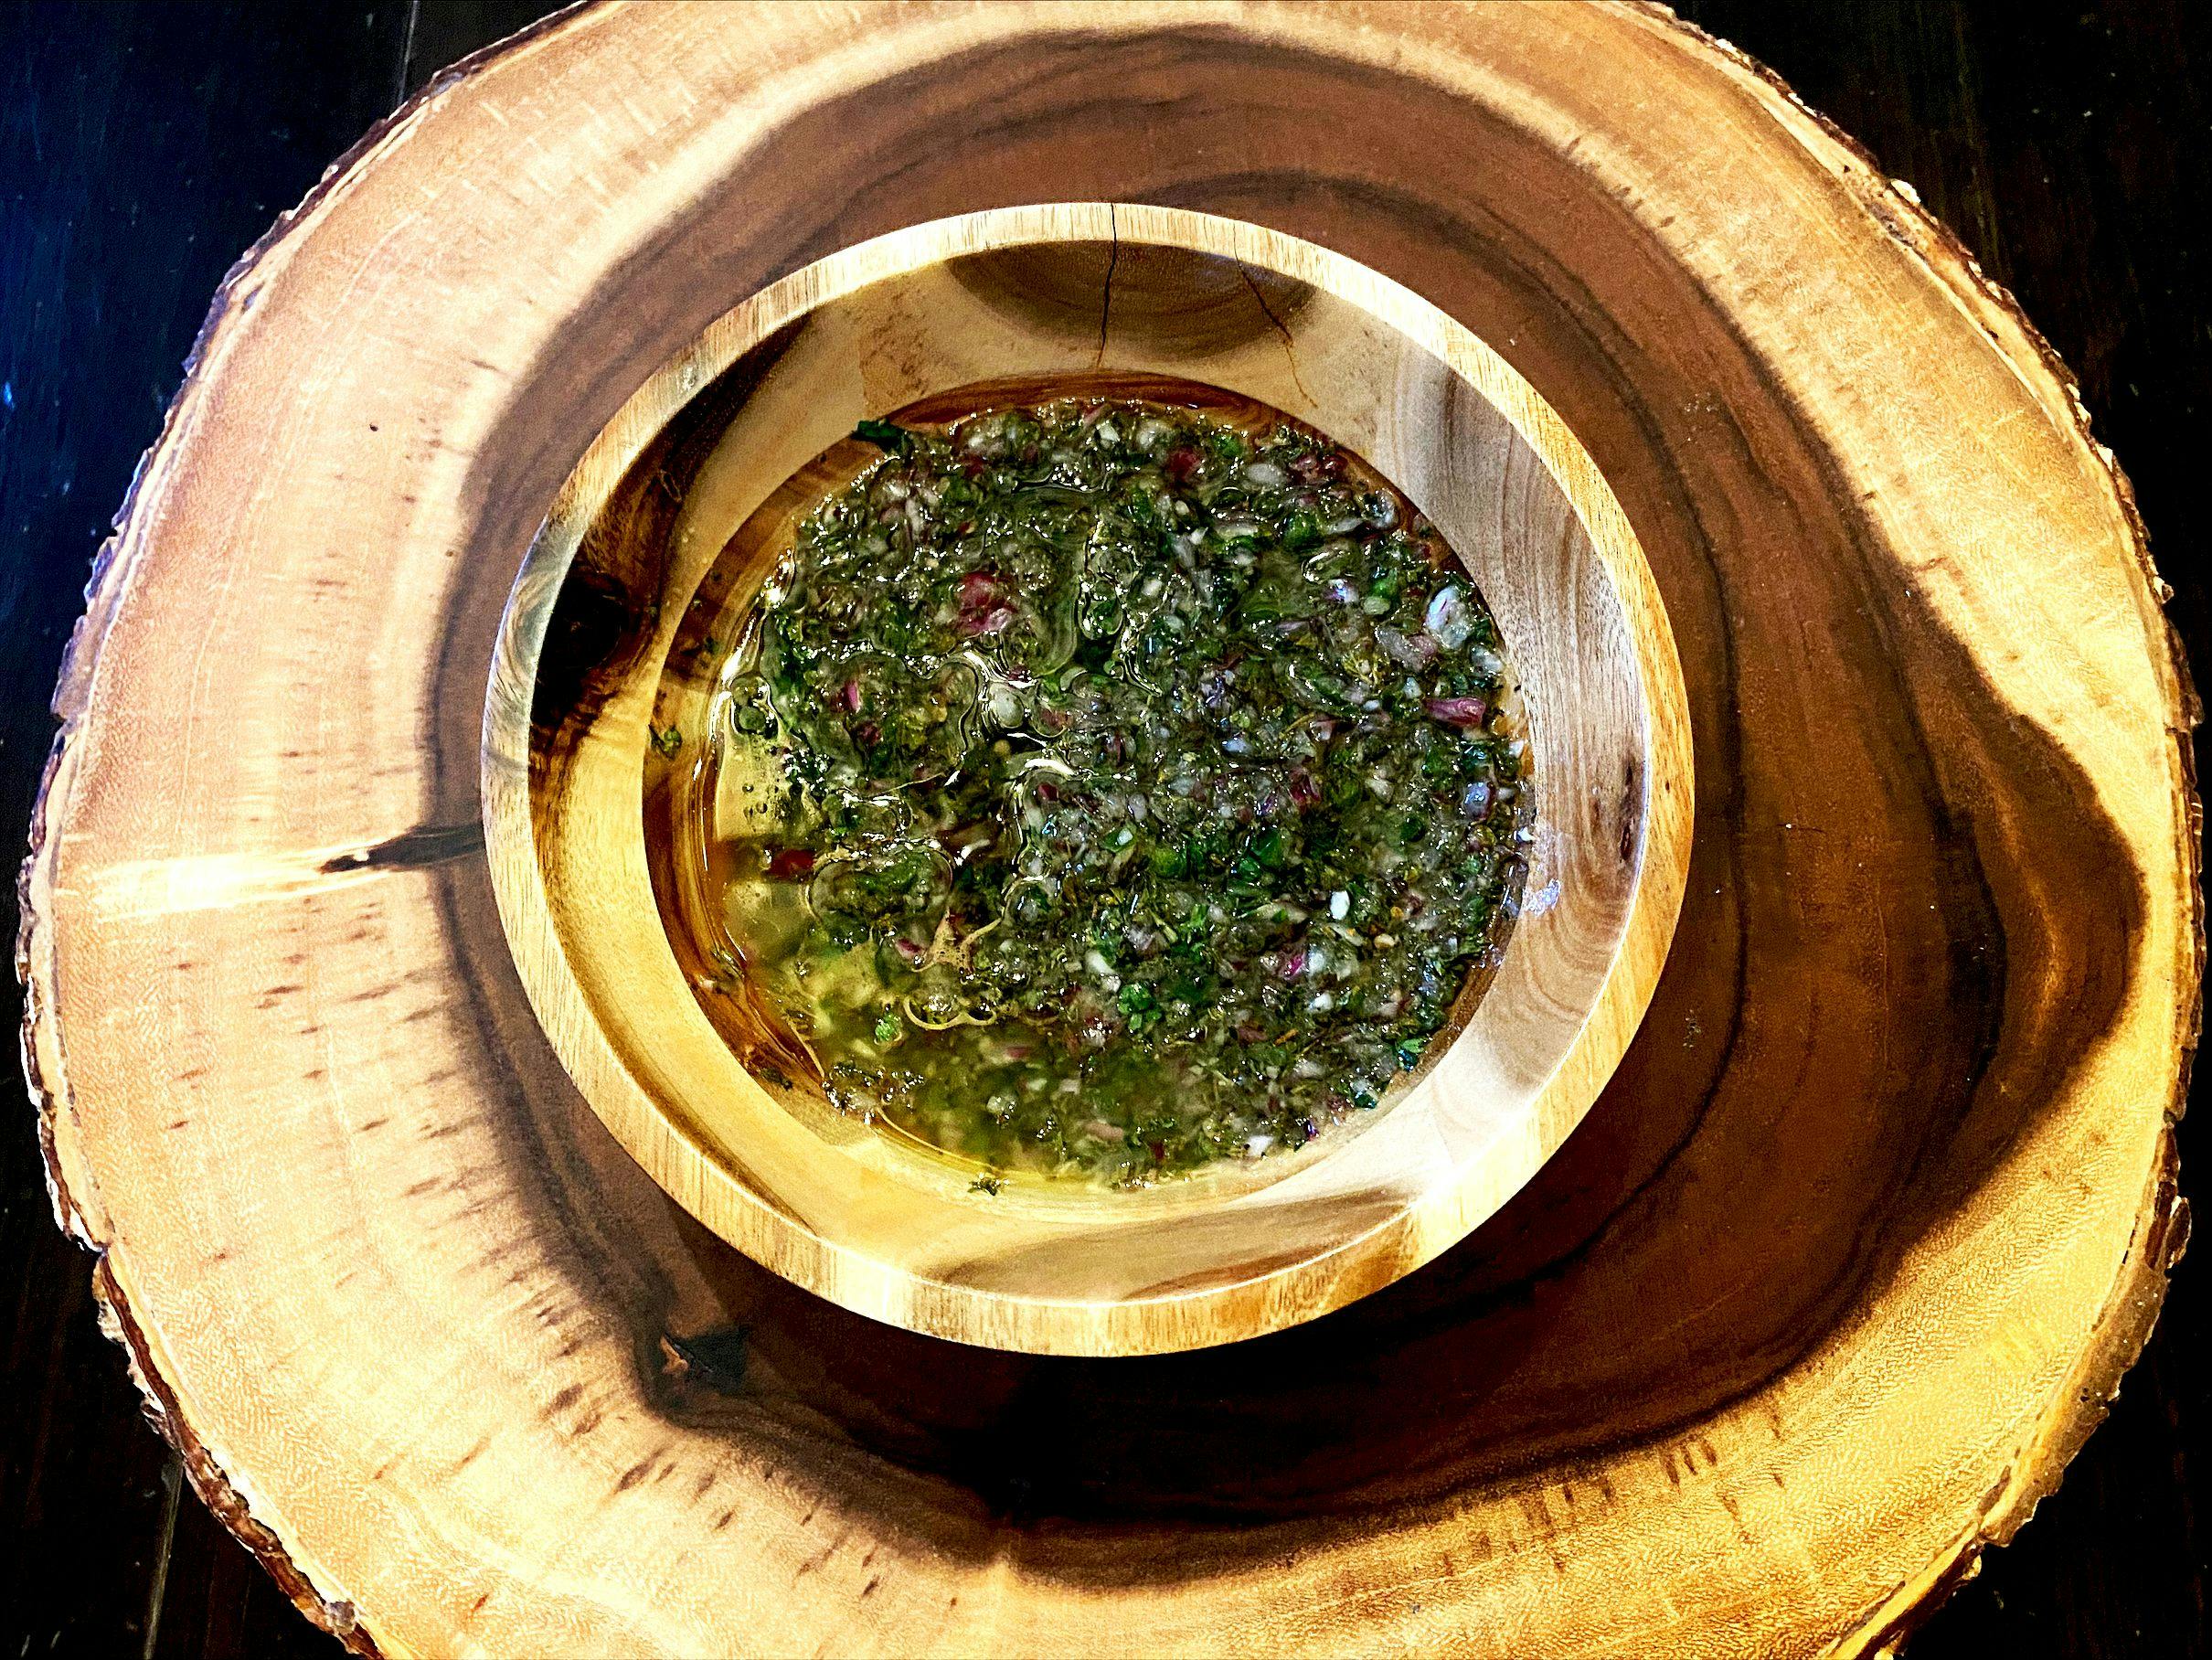 Originating in South America, chimichurri typically is used on grilled meat but adds a flavor punch to salads, roasted vegetables, potatoes, rice and sandwiches.